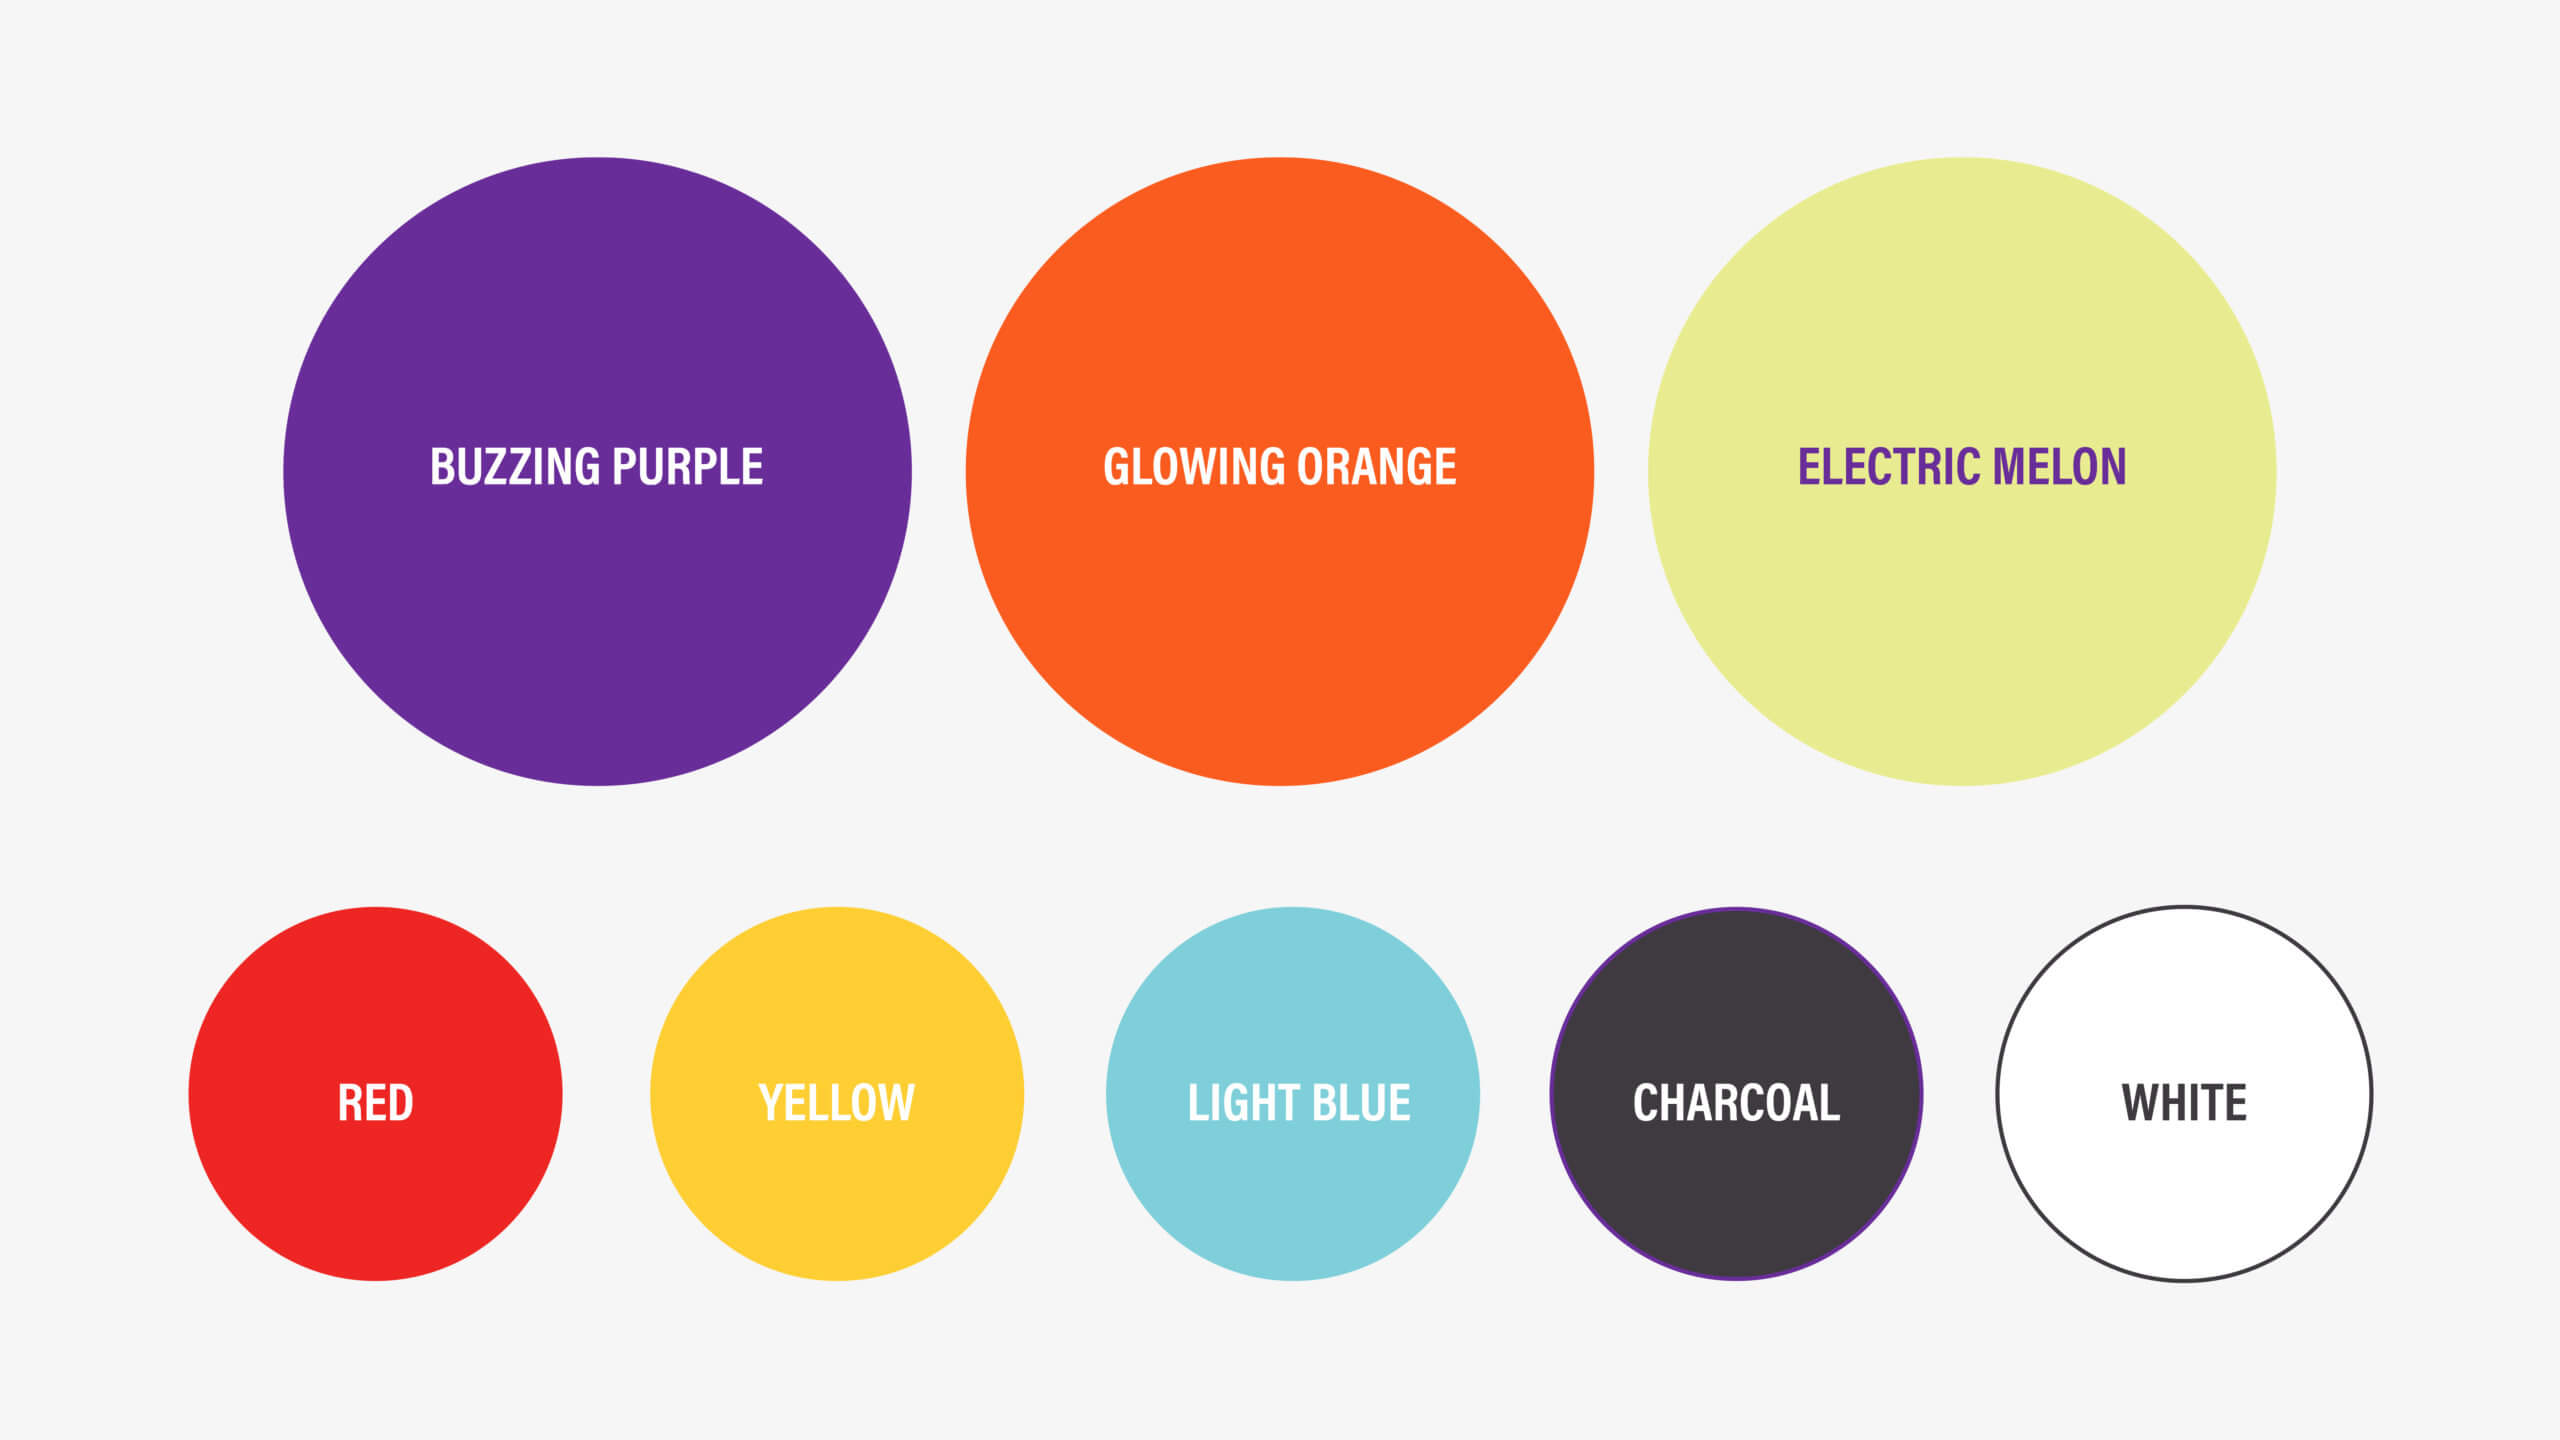 The Morning Hangover brand color palette. The main palette consists of 3 colors; Buzzing Purple, Glowing Orange, and Electric Melon. The secondary palette consists of red, yellow, light blue, charcoal, and white.